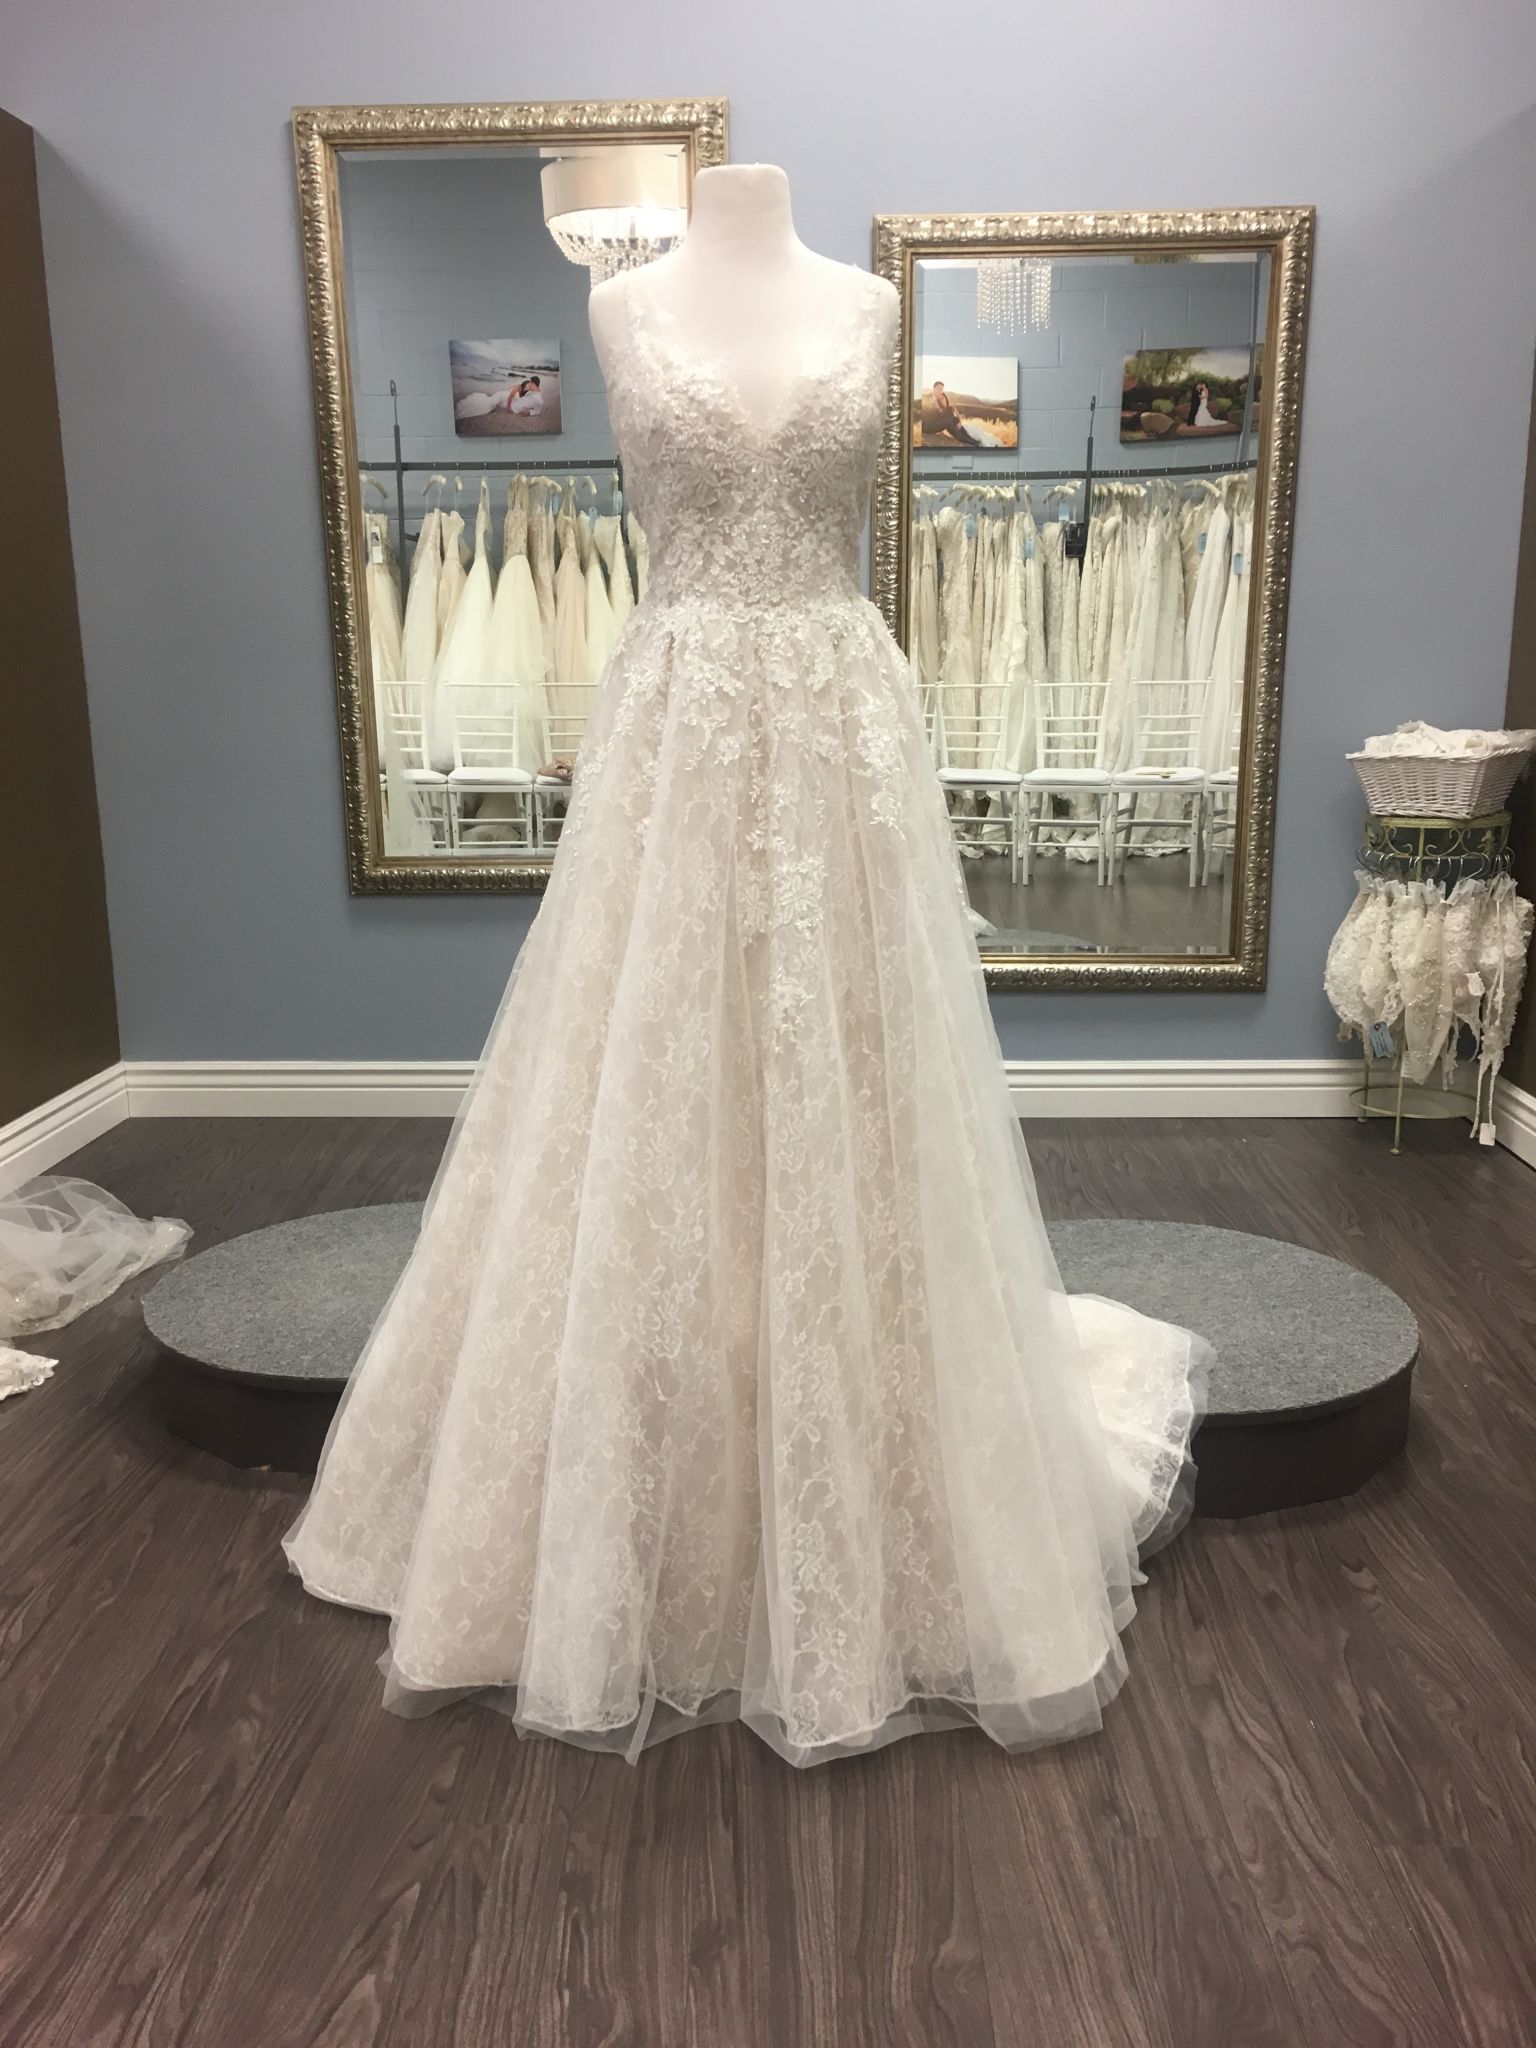 Ruth by Maggie Sottero